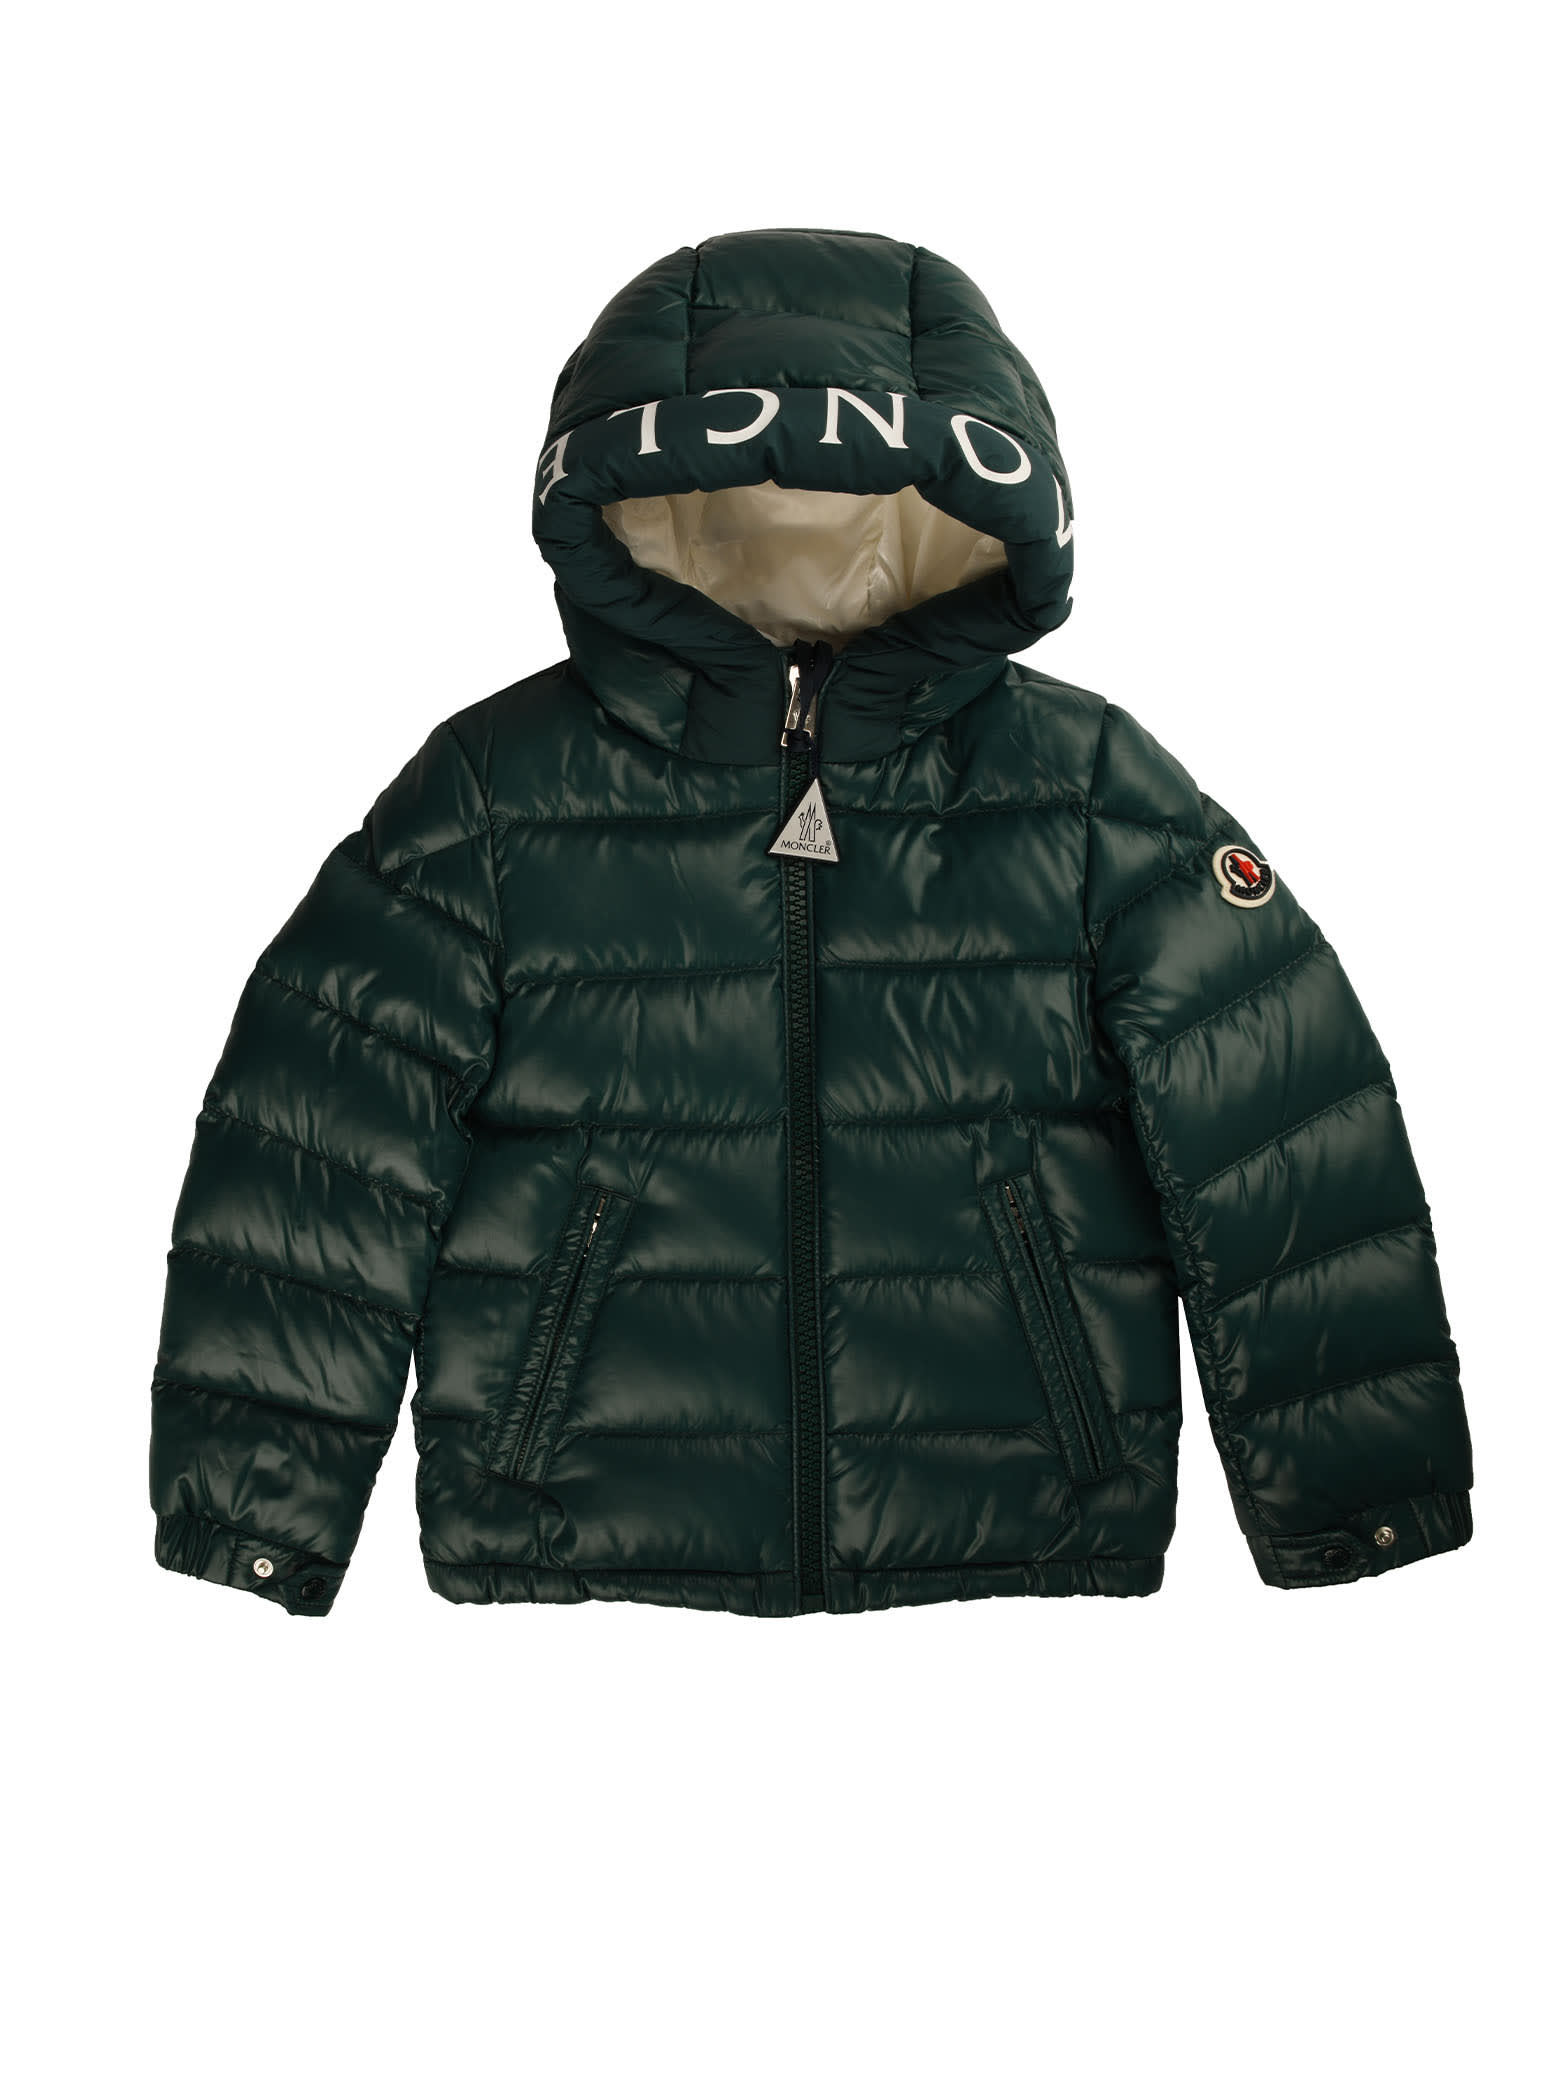 Moncler Green Jacket With Hood Writing